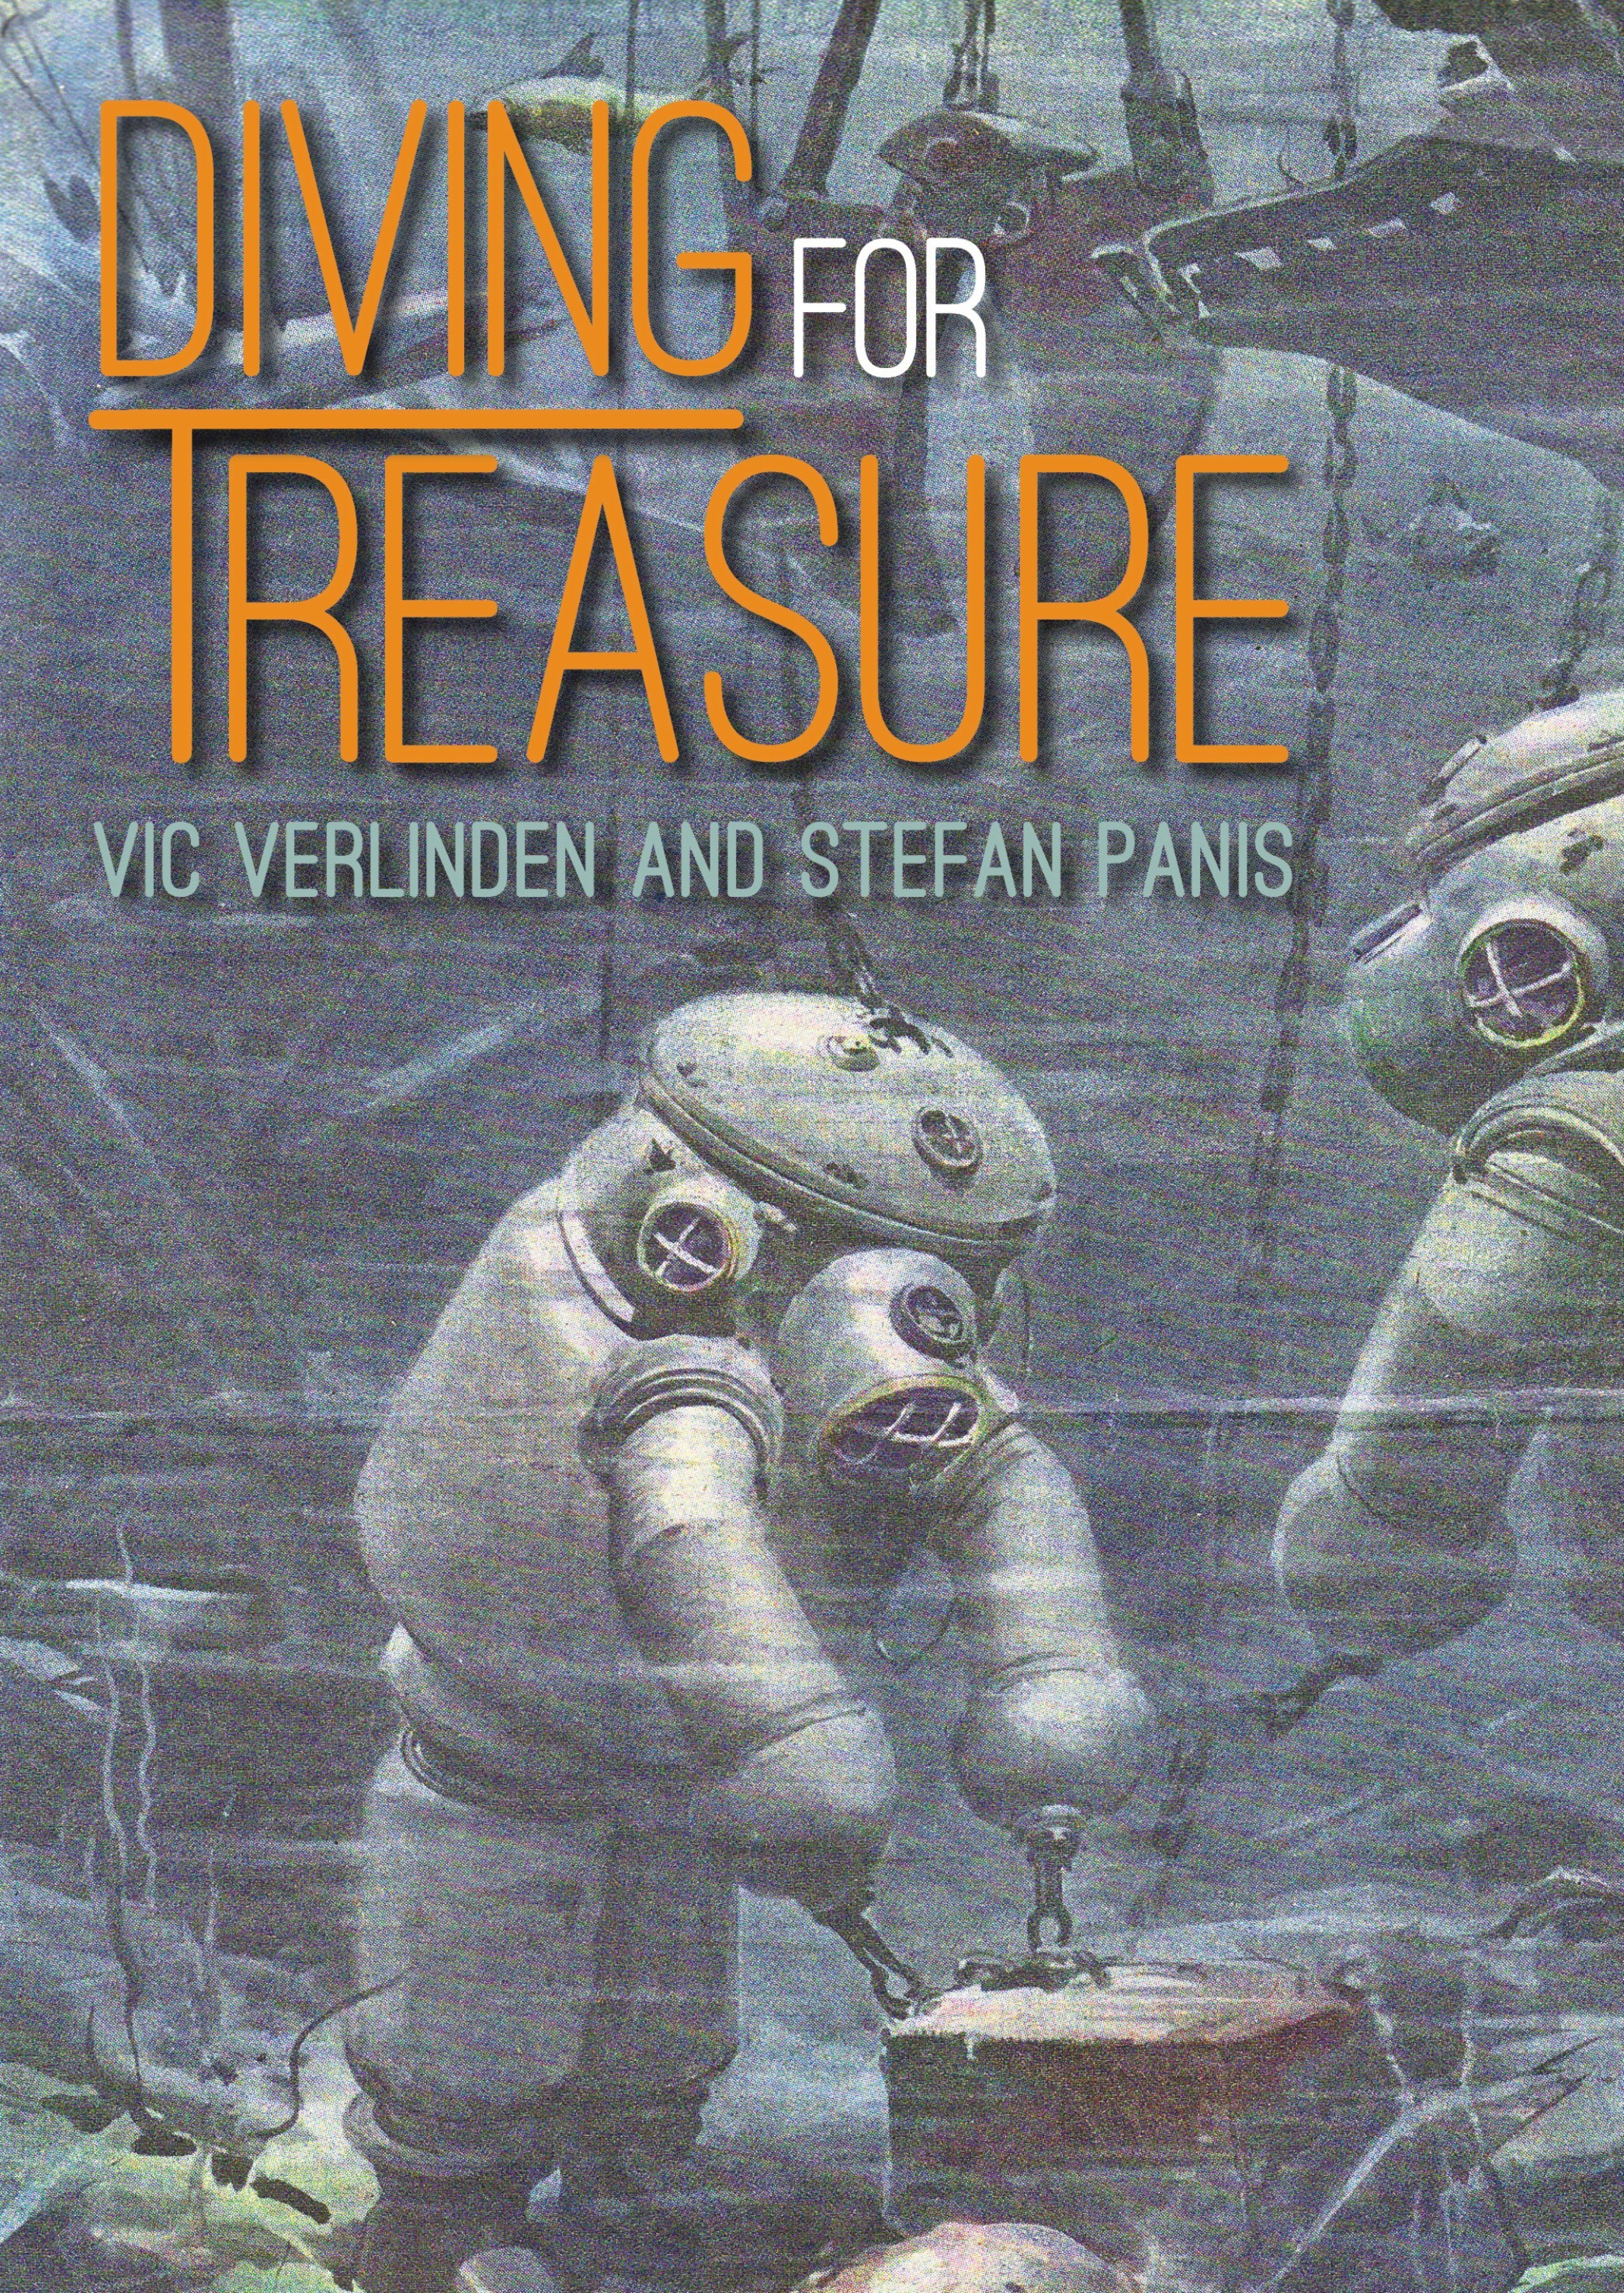 'Diving For Treasure' Shipwreck Book, by Vic Verlinden and Stefan Panis, Due Out This Month